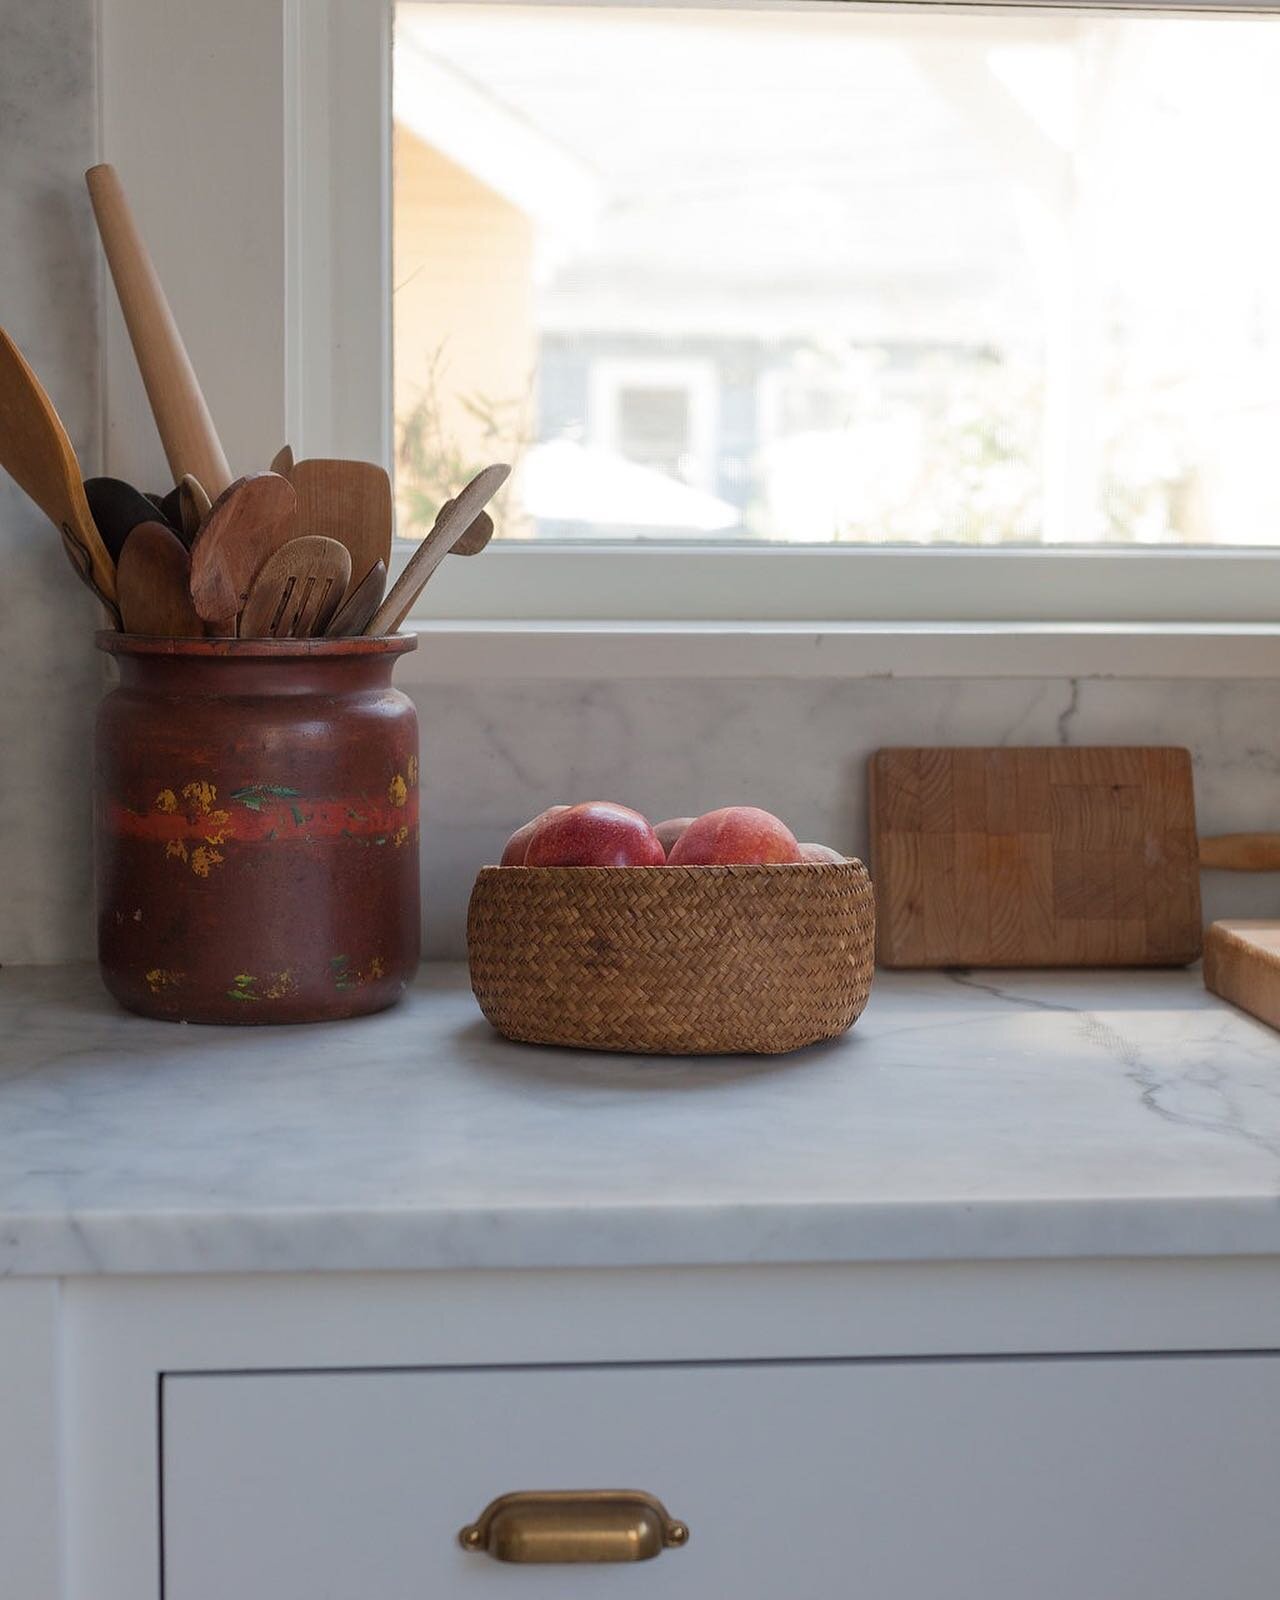 A layered kitchen with all the essentials! I'm  all for an intentionally lived-in, cozy kitchen. Wood cutting boards, well-loved pepper grinders, antique bowls, and ceramic pieces all make my eclectic heart happy. 

Are you all-in on displaying your 